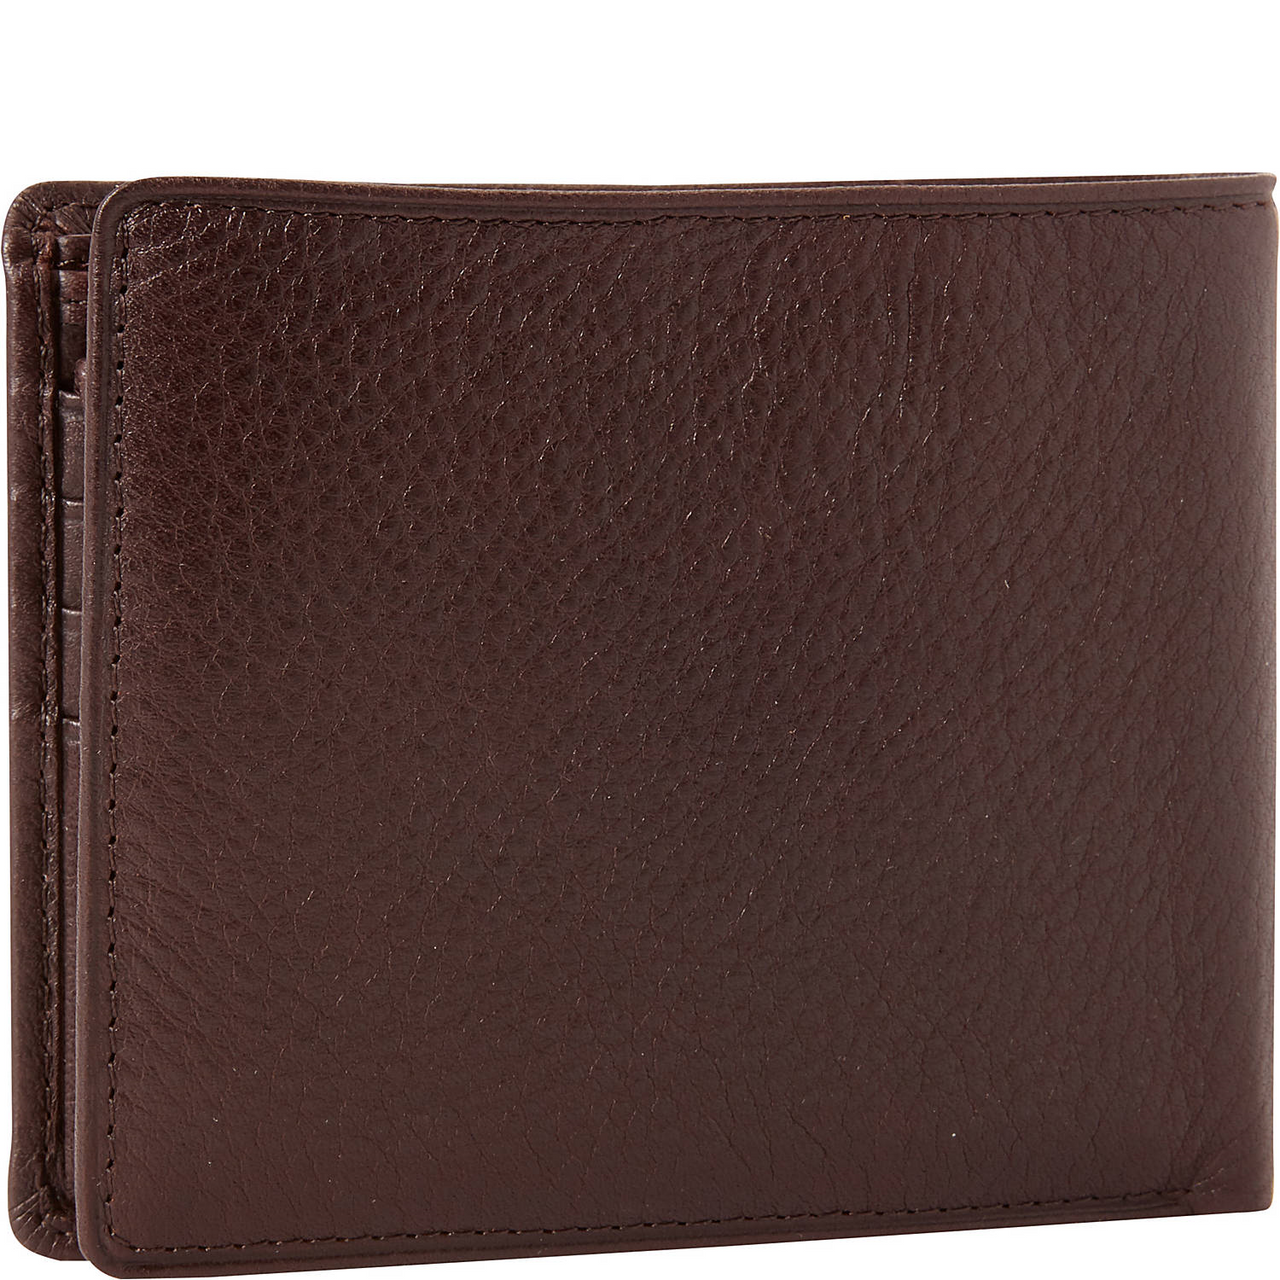 Cashmere ID Passcase Wallet - Leather Loom